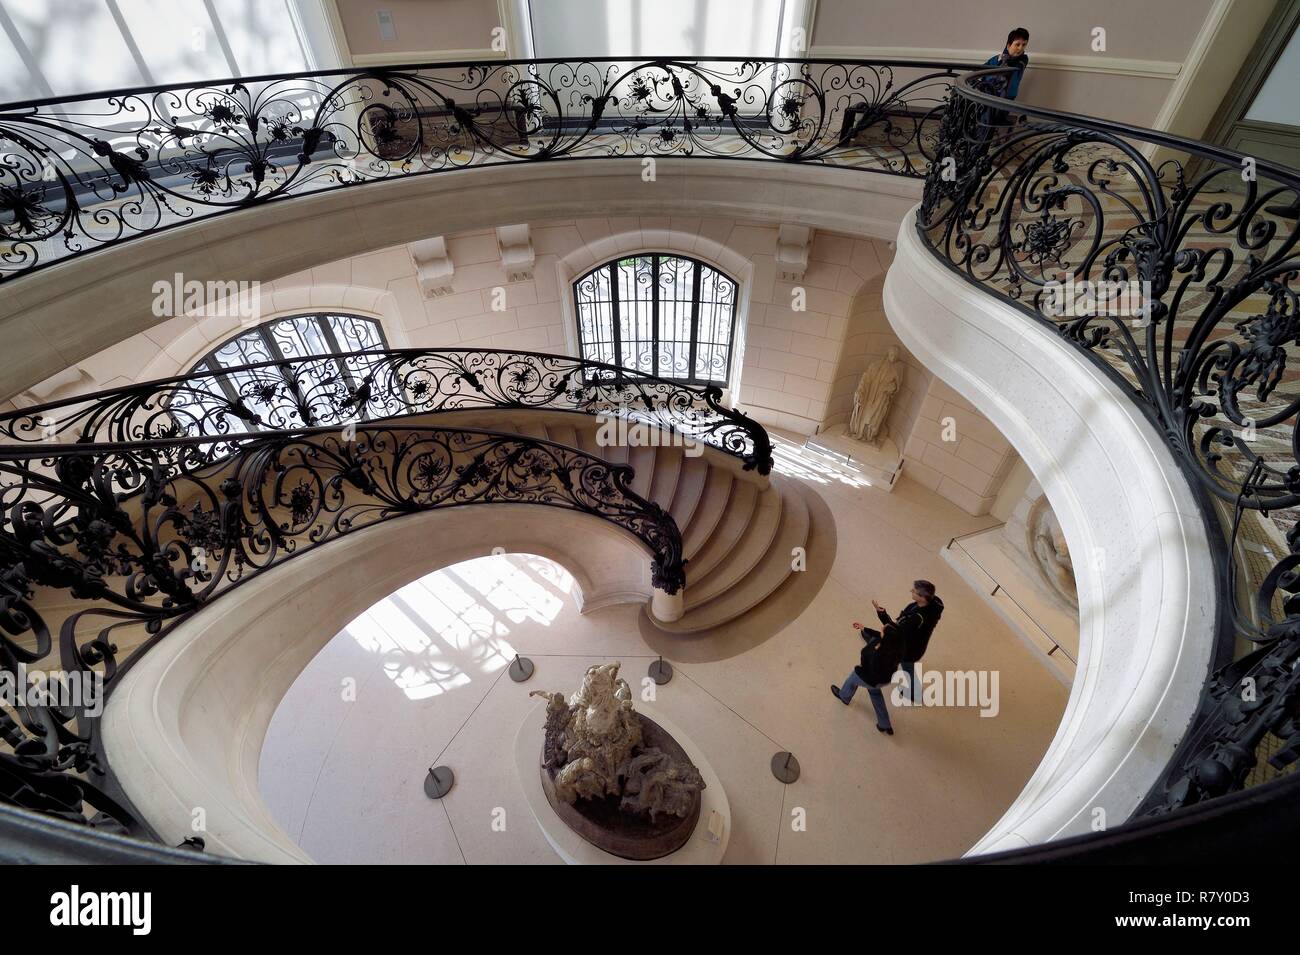 France, Paris, the Petit Palais, built on the occasion of the Universal Exhibition of 1900 by architect Charles Girault, houses the Fine Arts Museum of the Paris, one of the two stairs Stock Photo